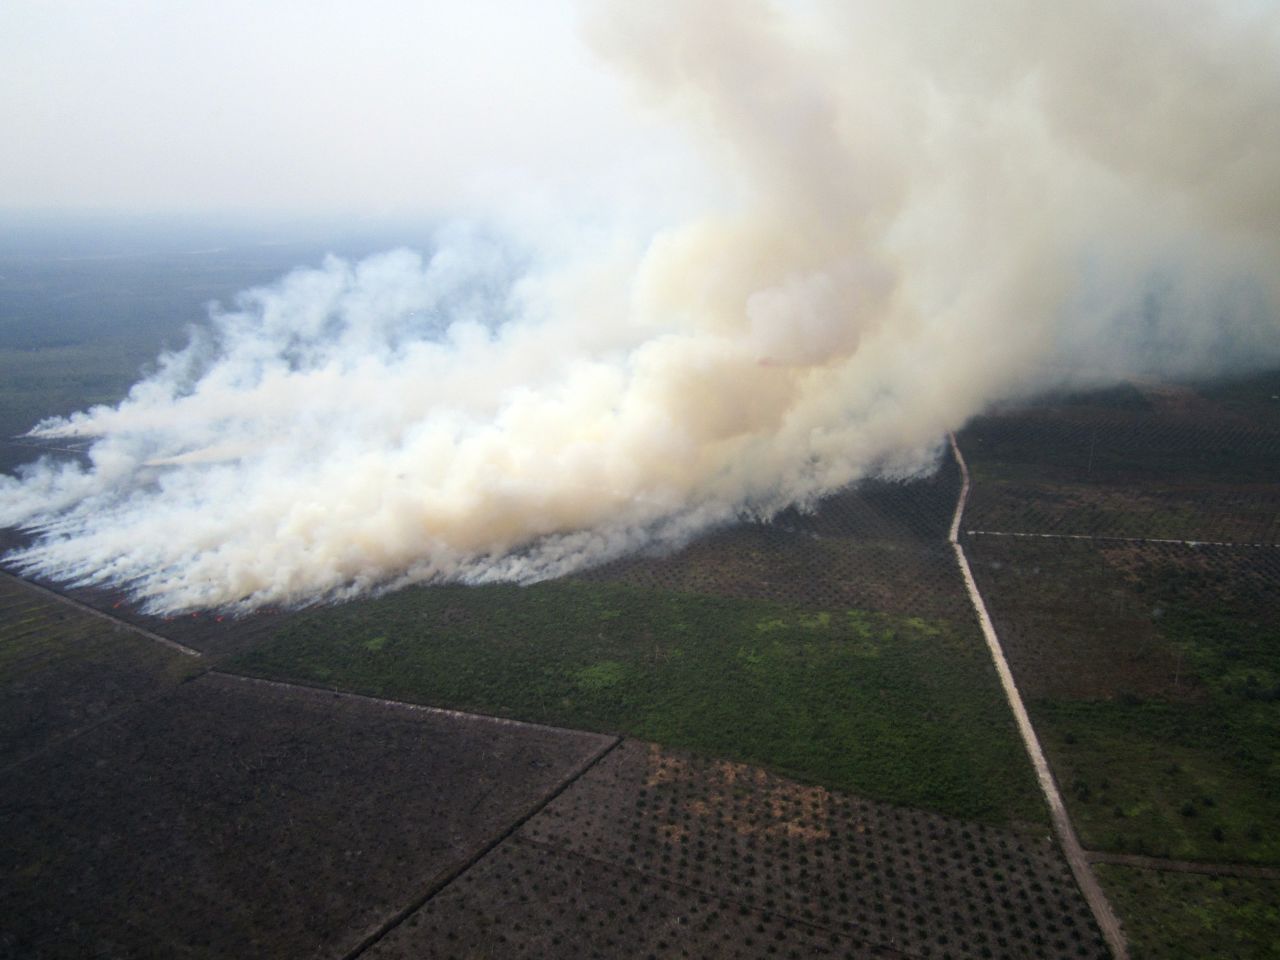 Smoke billowing from fires in areas surrounded by plantations in Riau province, on Indonesia's Sumatra island, about 173 miles west of Singapore on June 17 2013. On June 20, Singapore demanded "definitive" action by Indonesia on forest fires raging in Sumatra as the nations prepared for emergency talks to ease the severe smog enveloping Singapore.